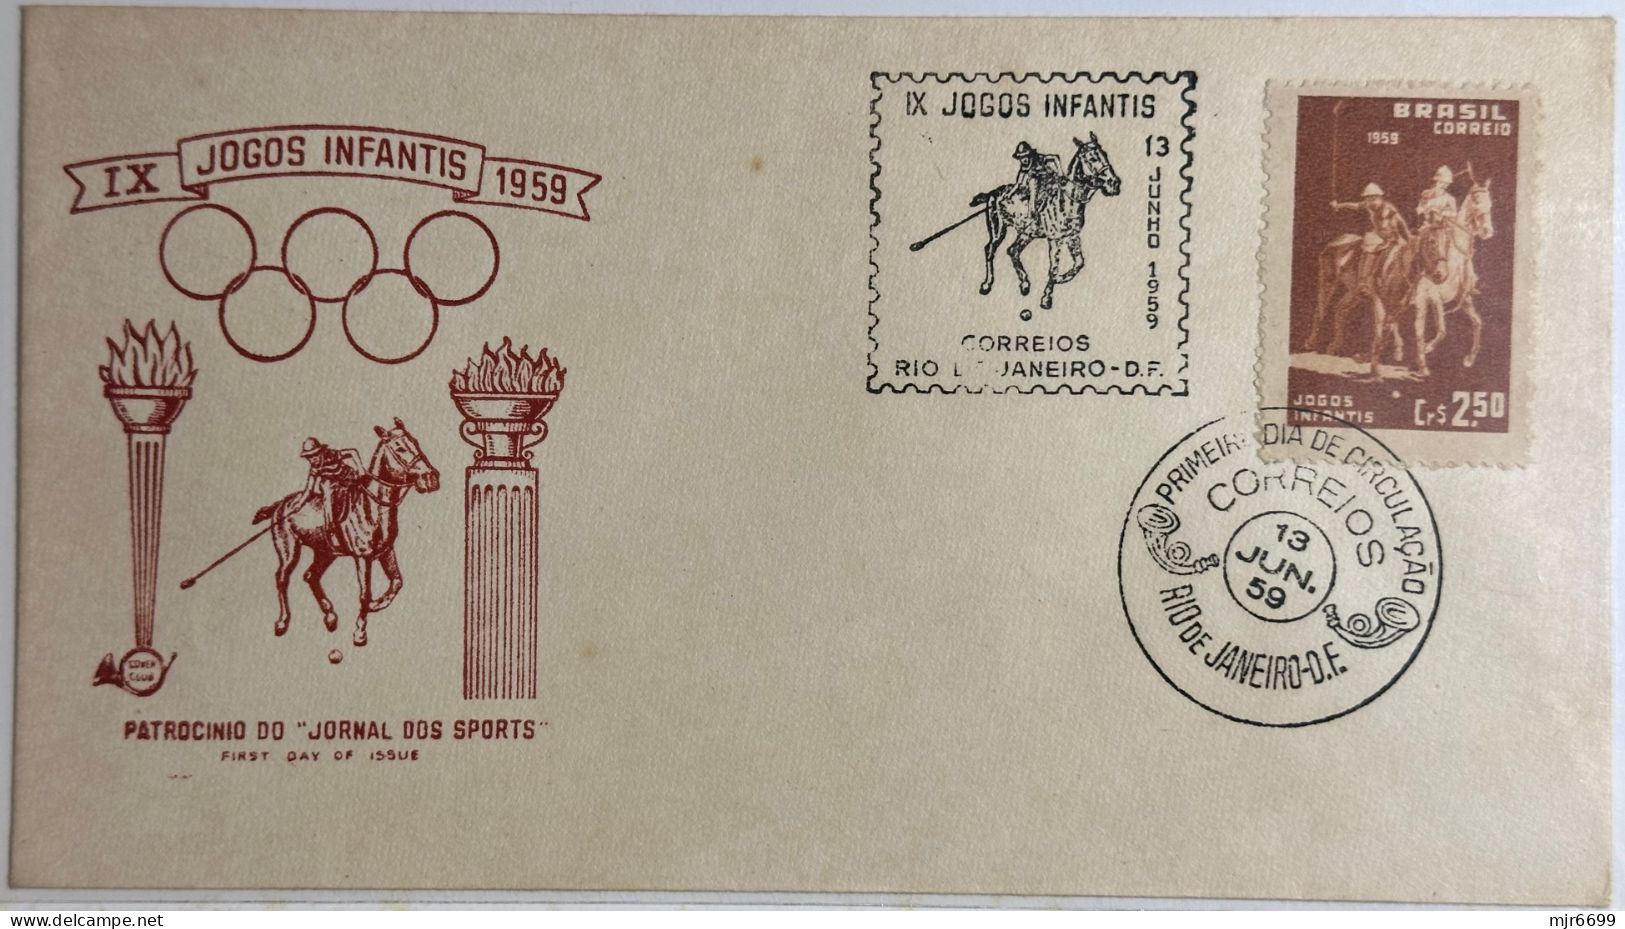 1959 COVER WITH "IX JOGOS INFANTIS" STAMPS, FIRST DAY CANCELLATION - Covers & Documents